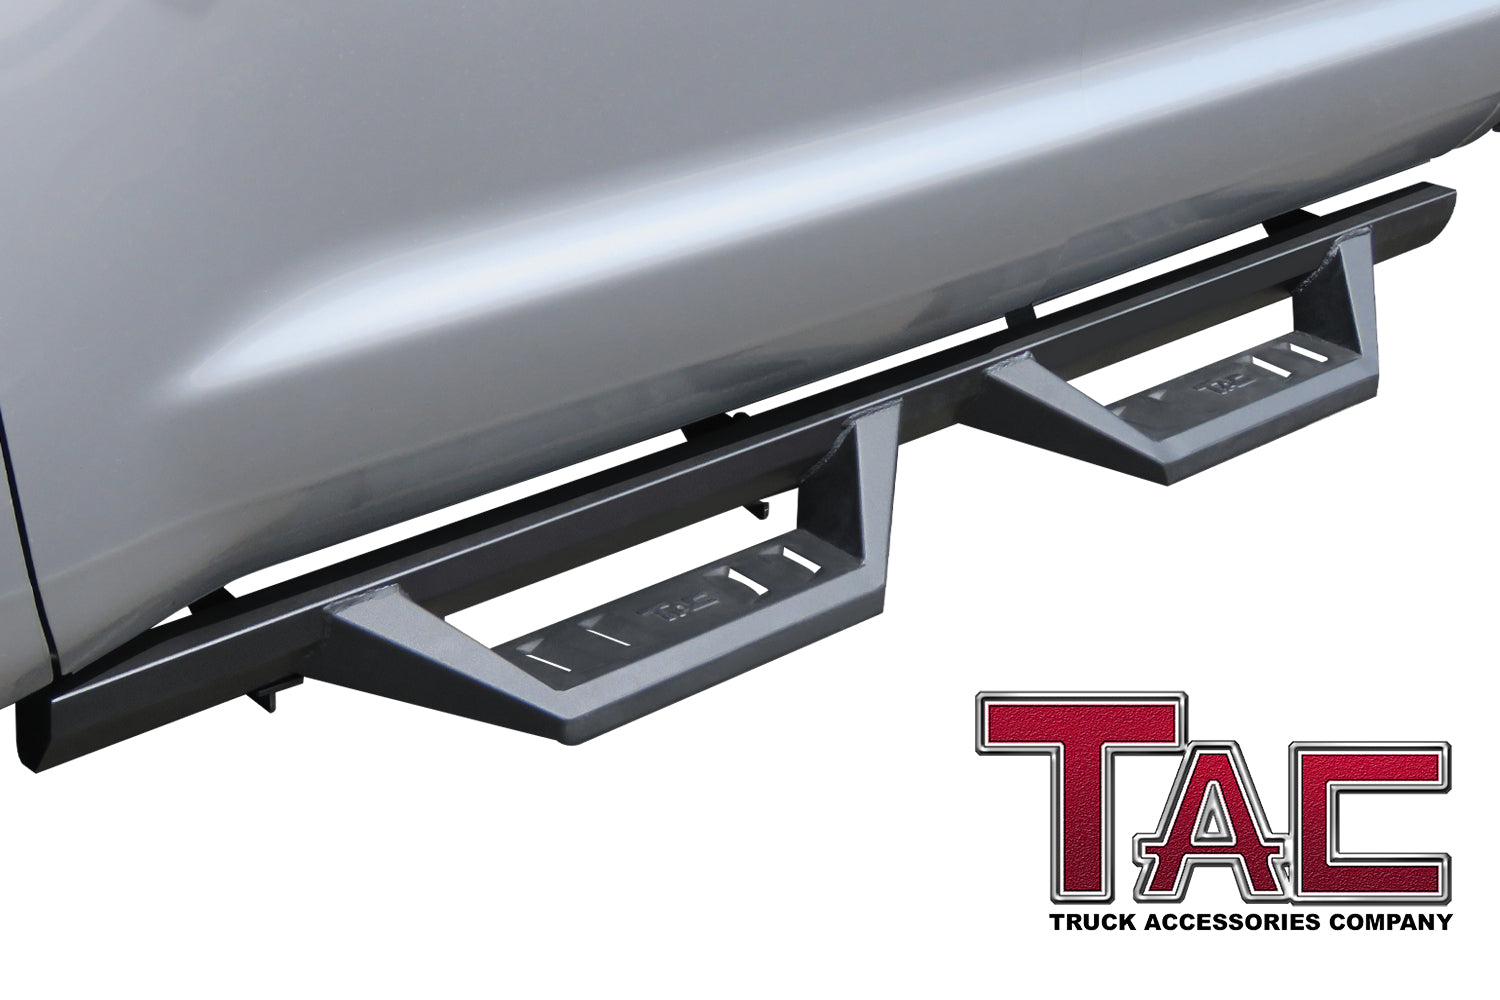 TAC Sidewinder Running Boards Fit 2007-2021 Toyota Tundra Double Cab 4” Drop Fine Texture Black Side Steps Nerf Bars Rock Slider Armor Off-Road Accessories (2pcs) - 0